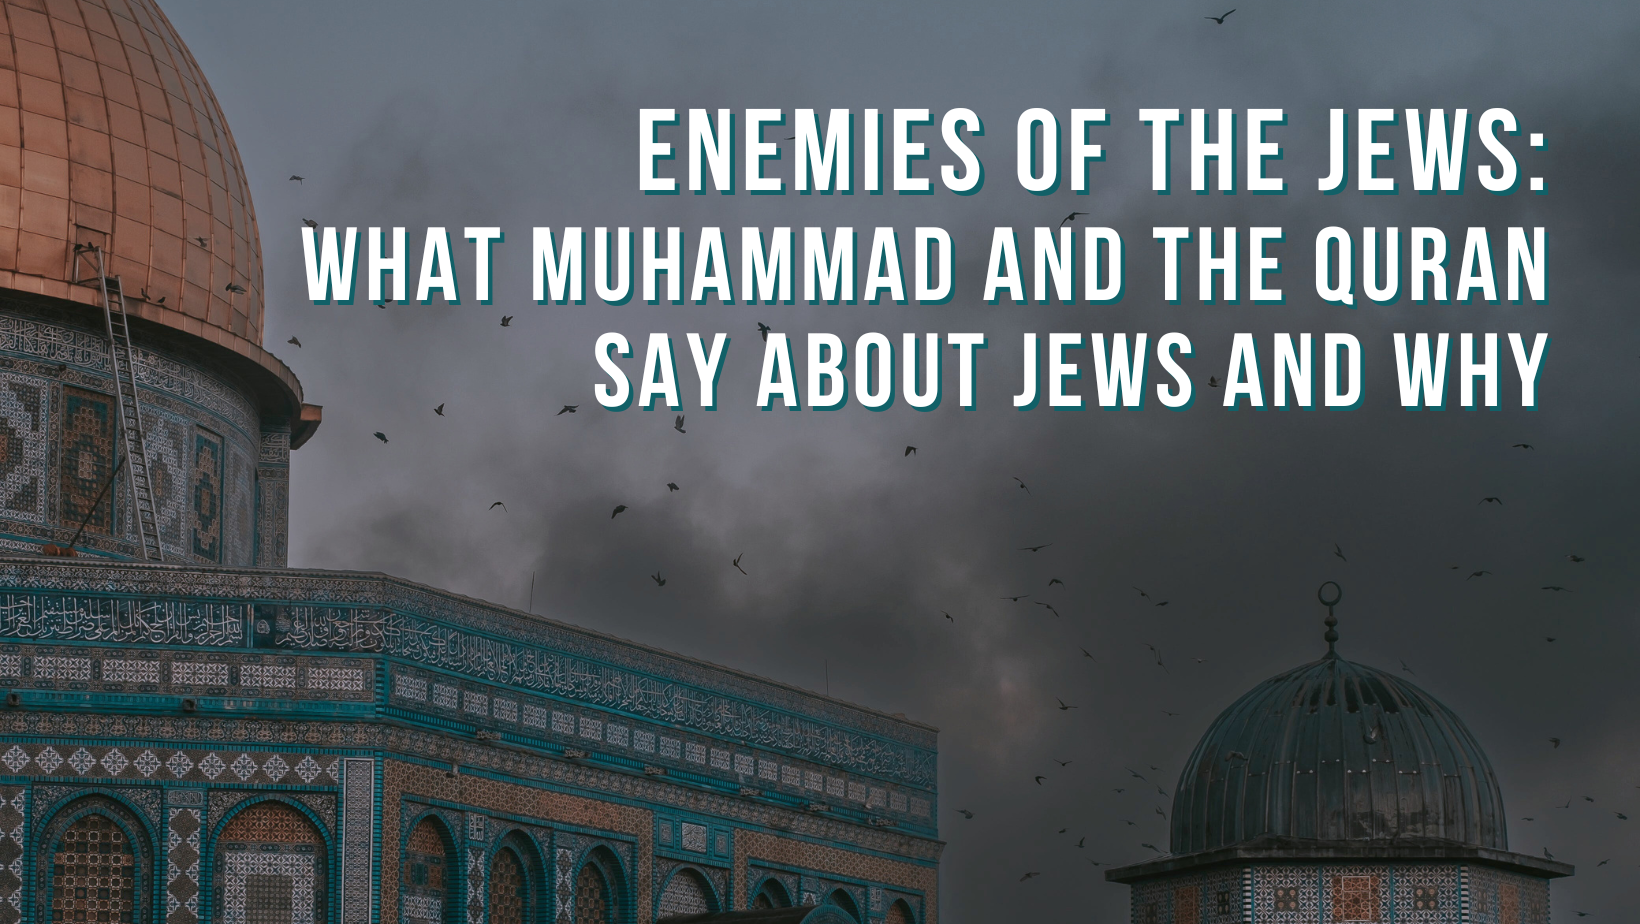 Enemies of the Jews: What Muhammad and the Quran say about Jews and why